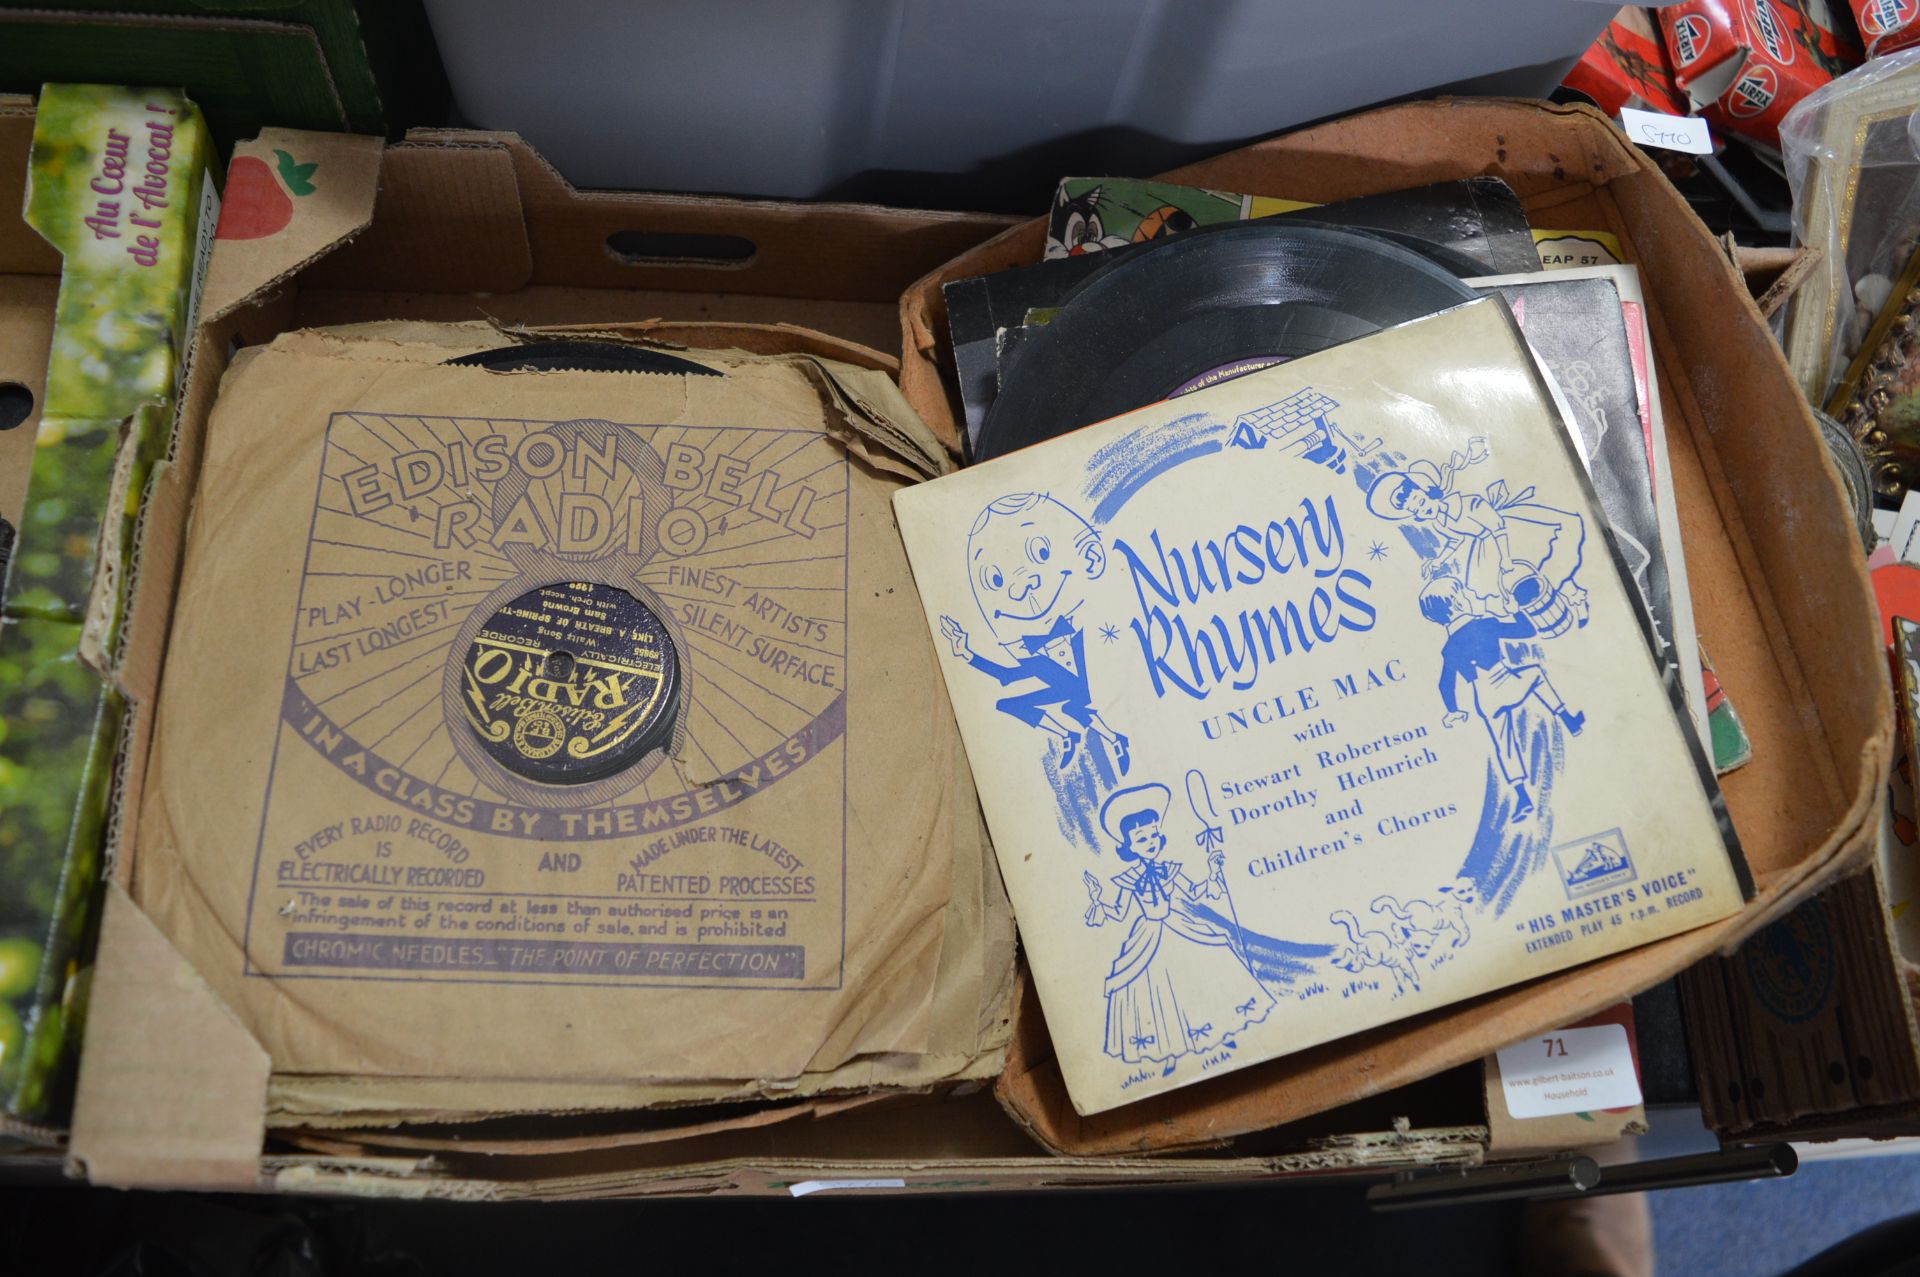 7" Singles Including 45 & 78 rpm Records